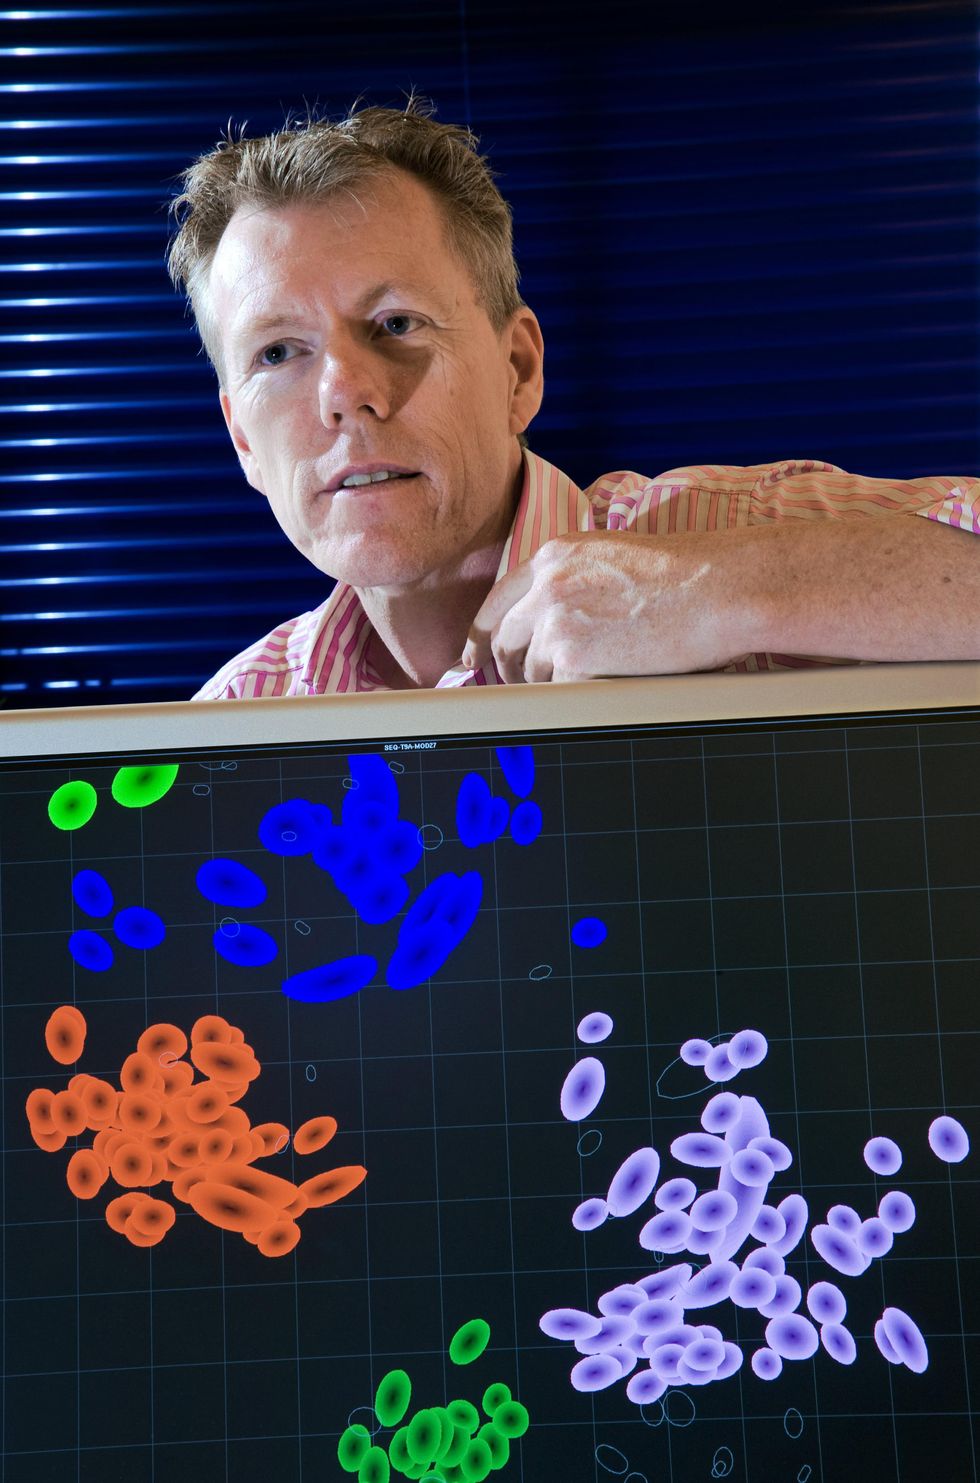 A man rests his arm on the top of computer screen showing clusters of colorful circles on a back background.